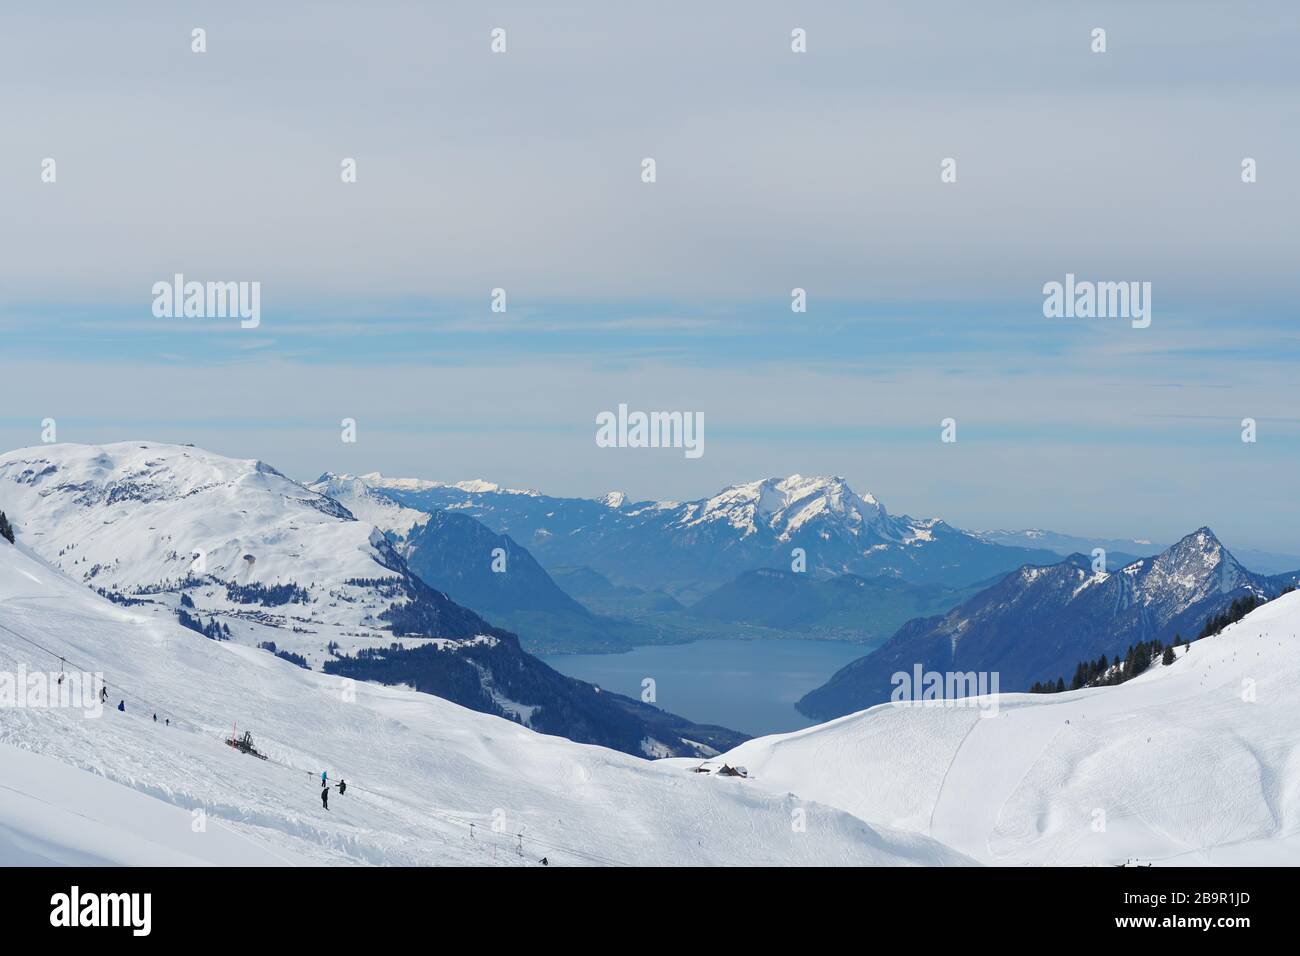 Skiing slopes of Hoch Ybrig skiing resort Switzerland with view on Lake Lucerne and panorama of Alps. Stock Photo